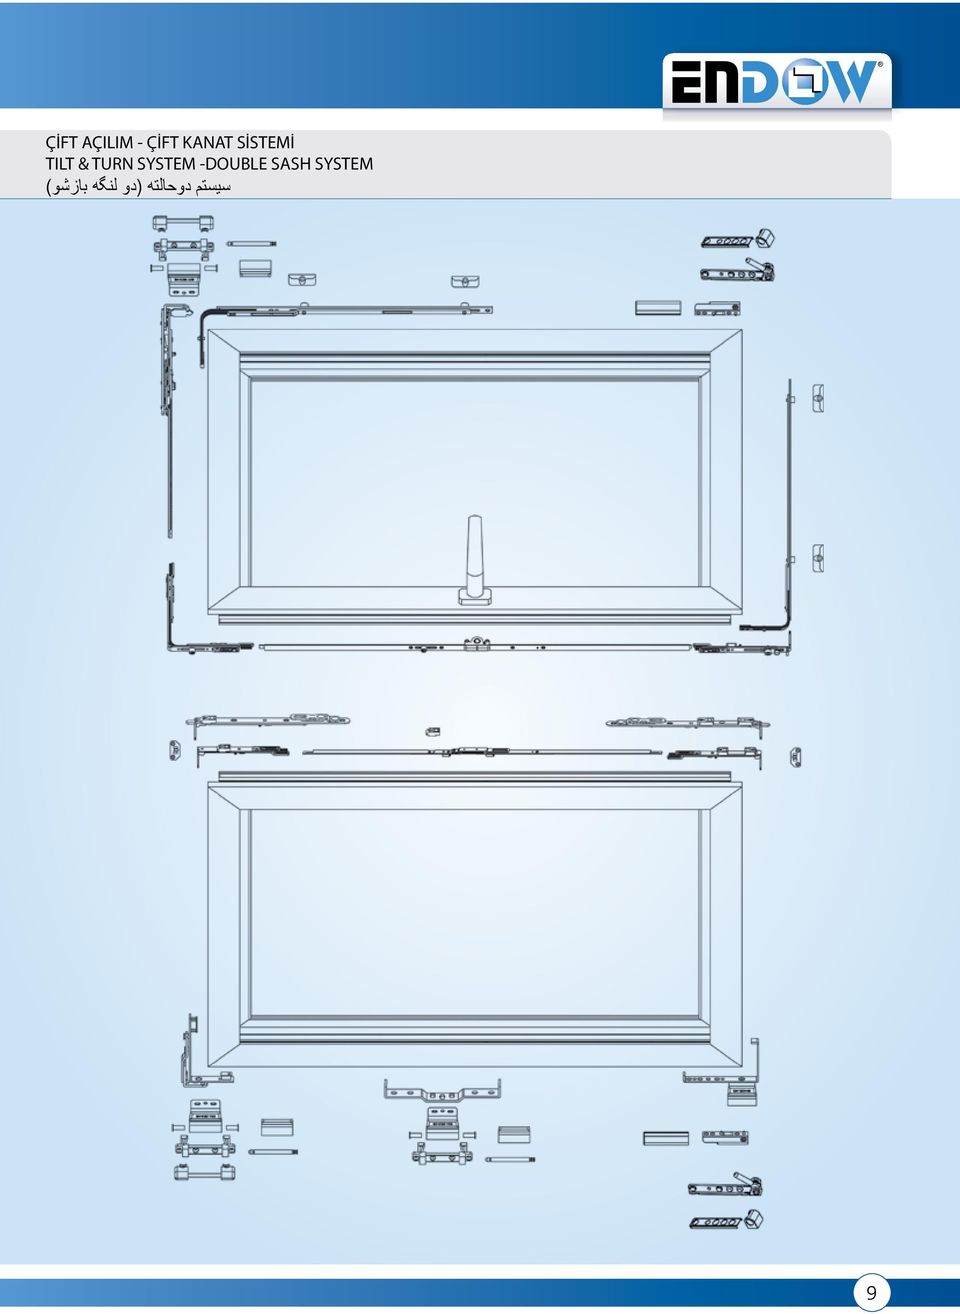 SYSTEM DOUBLE SASH